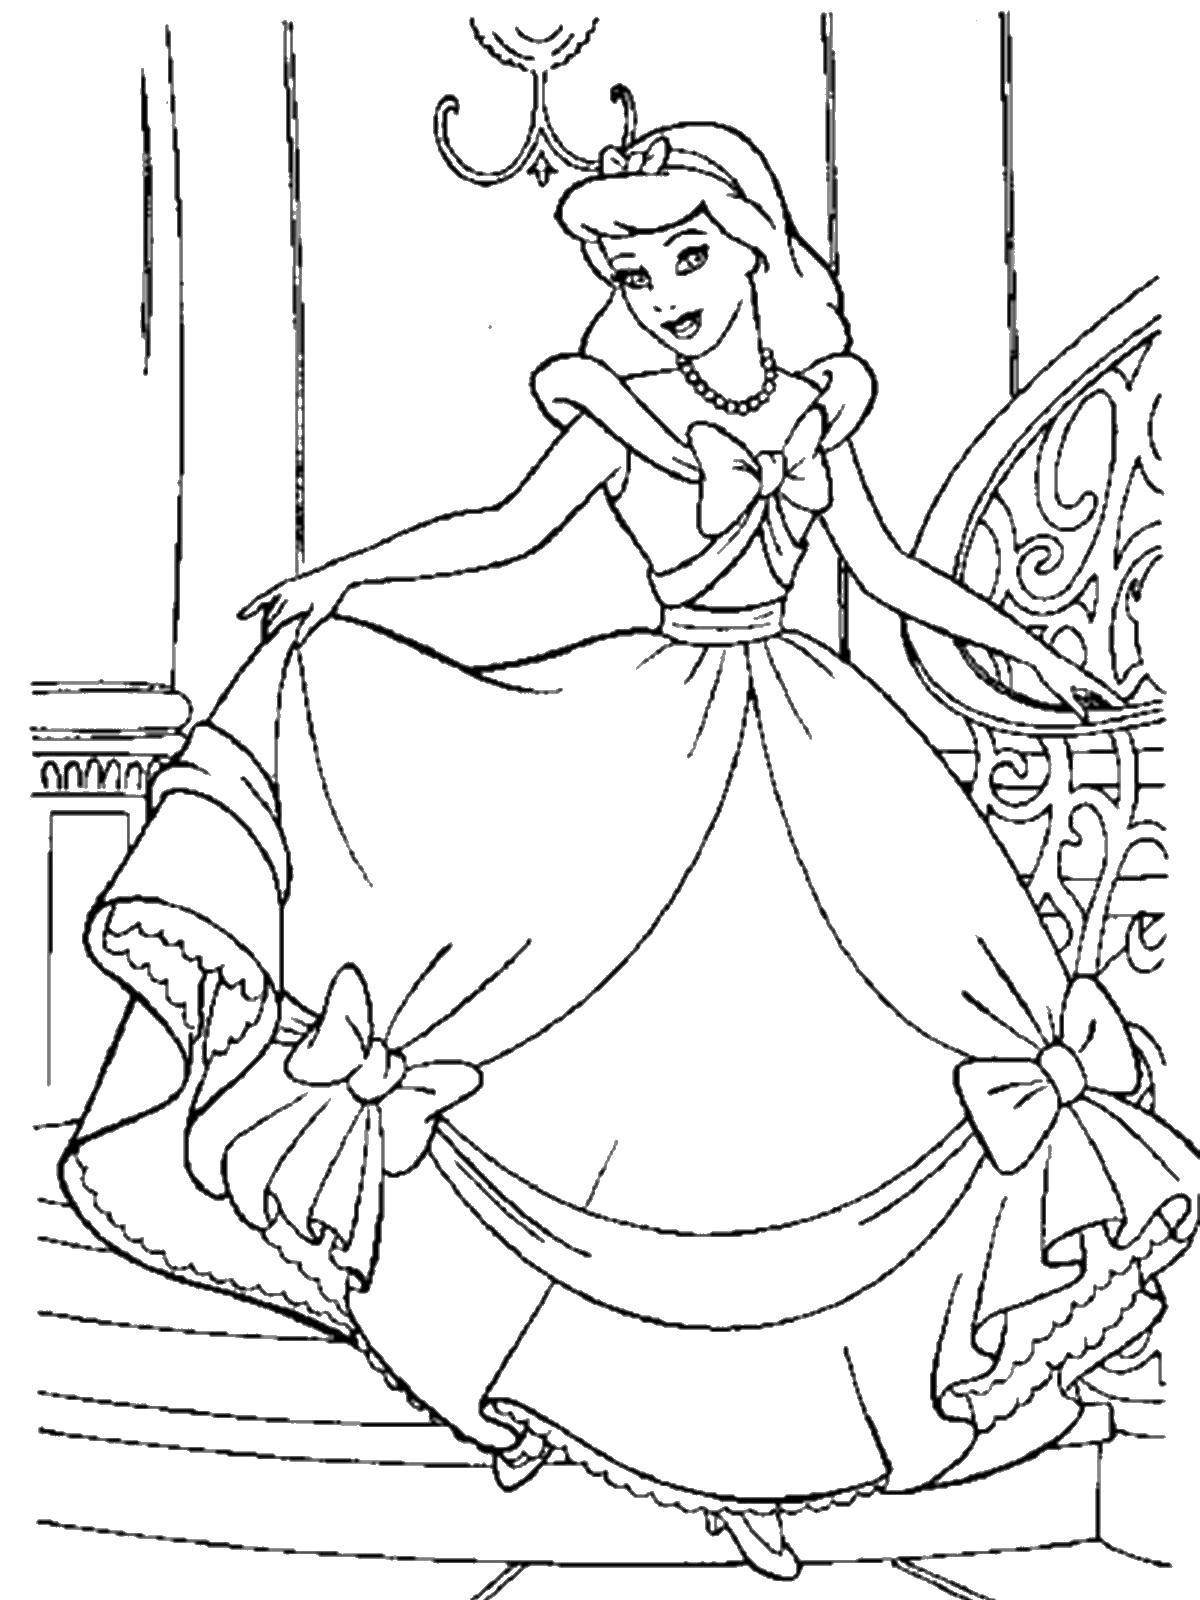 Coloring Cinderella tries on a dress. Category Cinderella. Tags:  Cinderella, slipper.